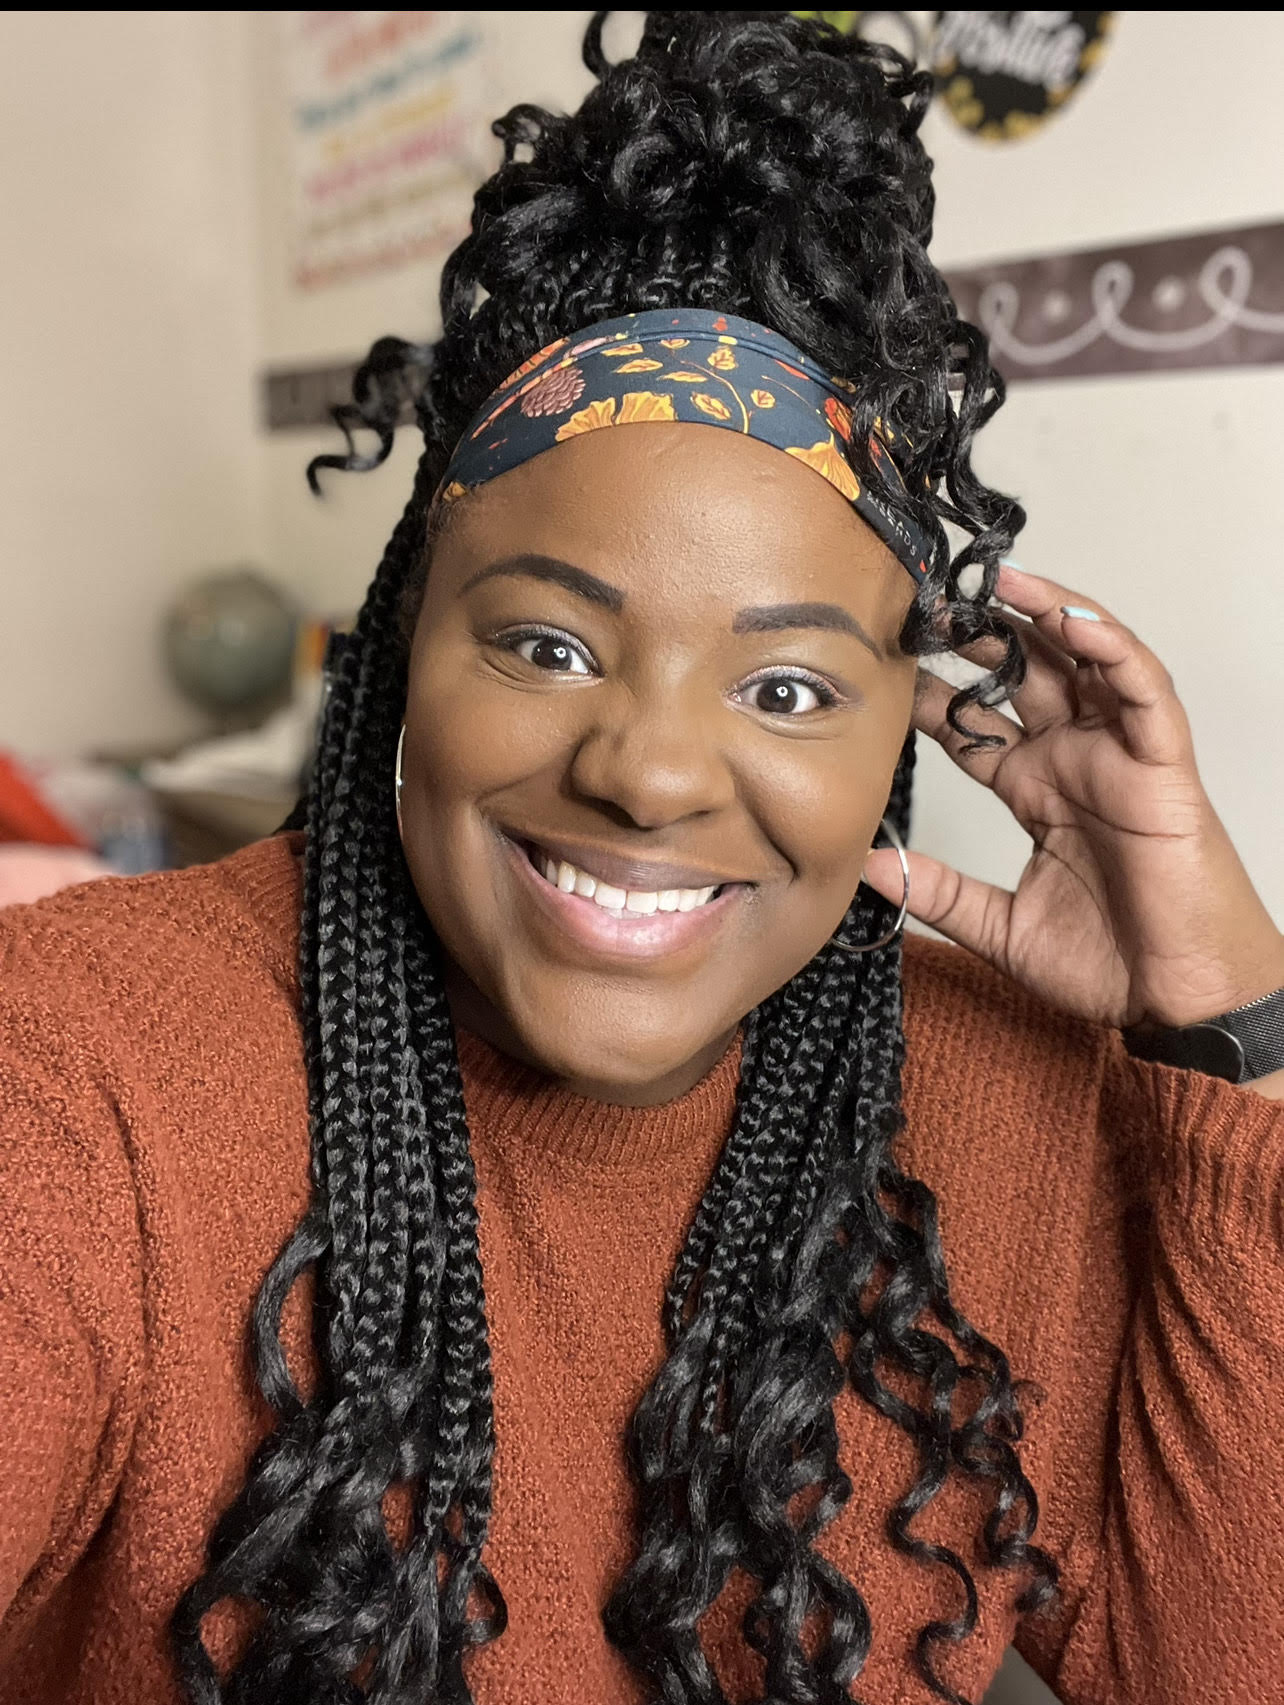 Picture of Briana Richardson, a Black woman with braids and wearing an orange sweater, smiling